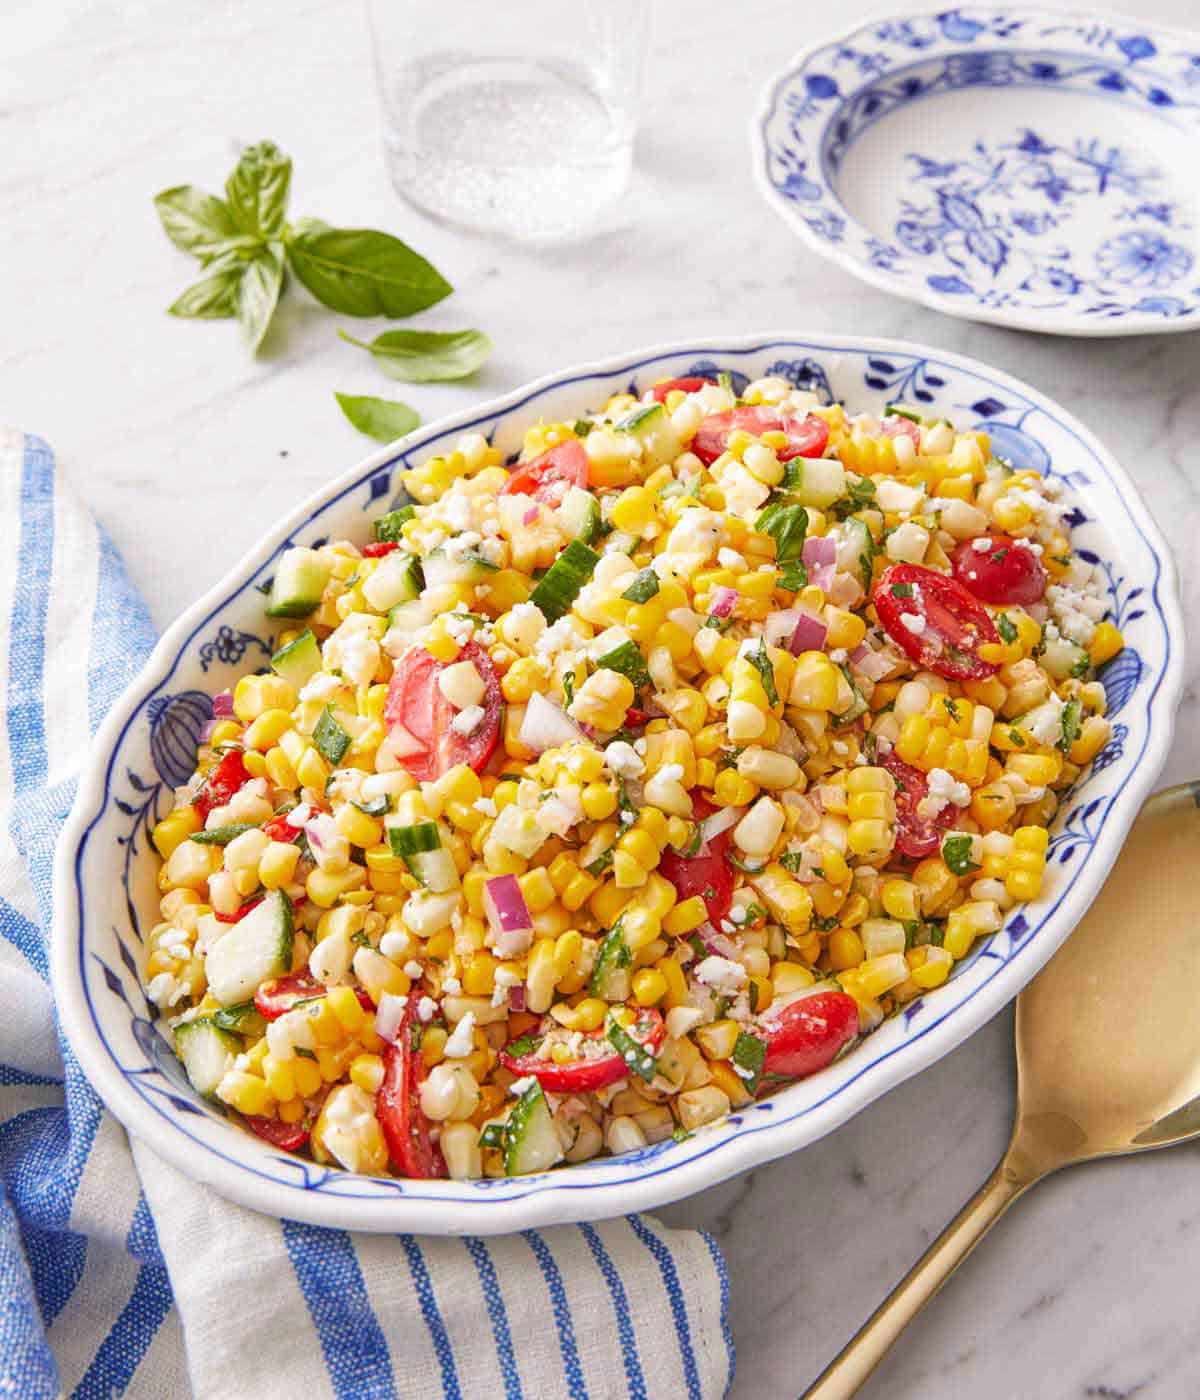 A platter of corn salad with a large golden serving spoon beside it.